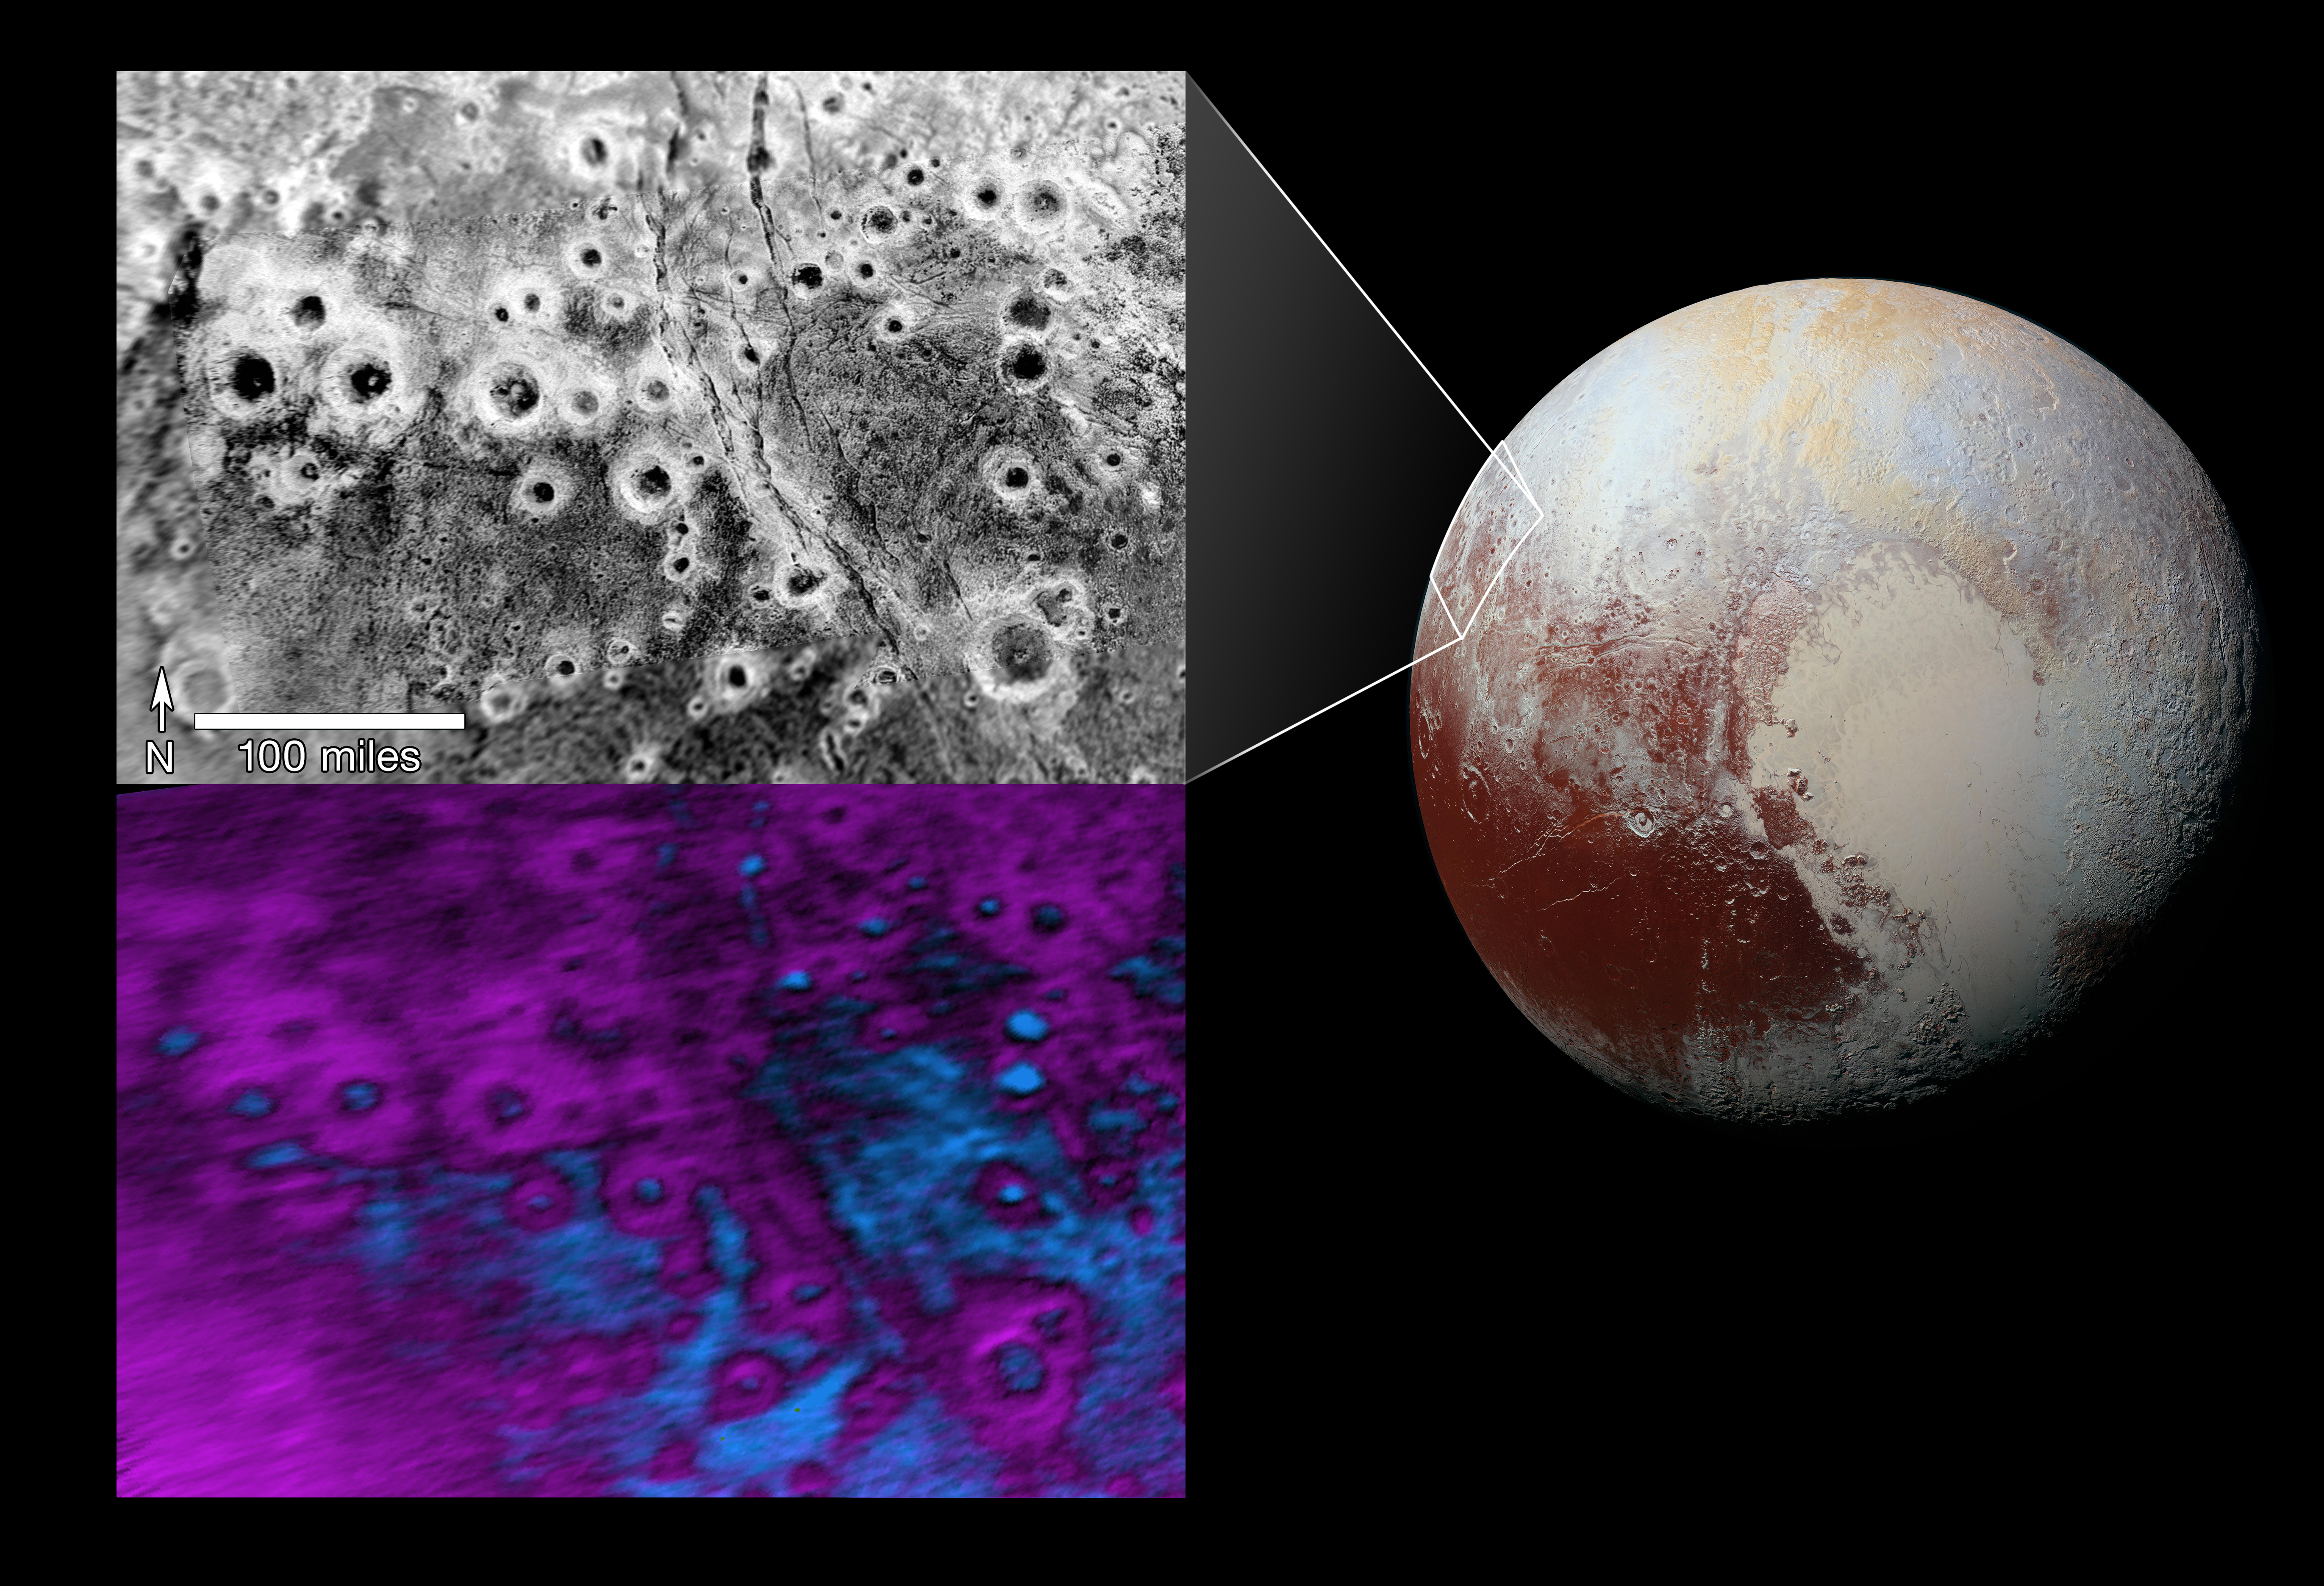 Mysterious 'Haloes' on Pluto Puzzle Scientists